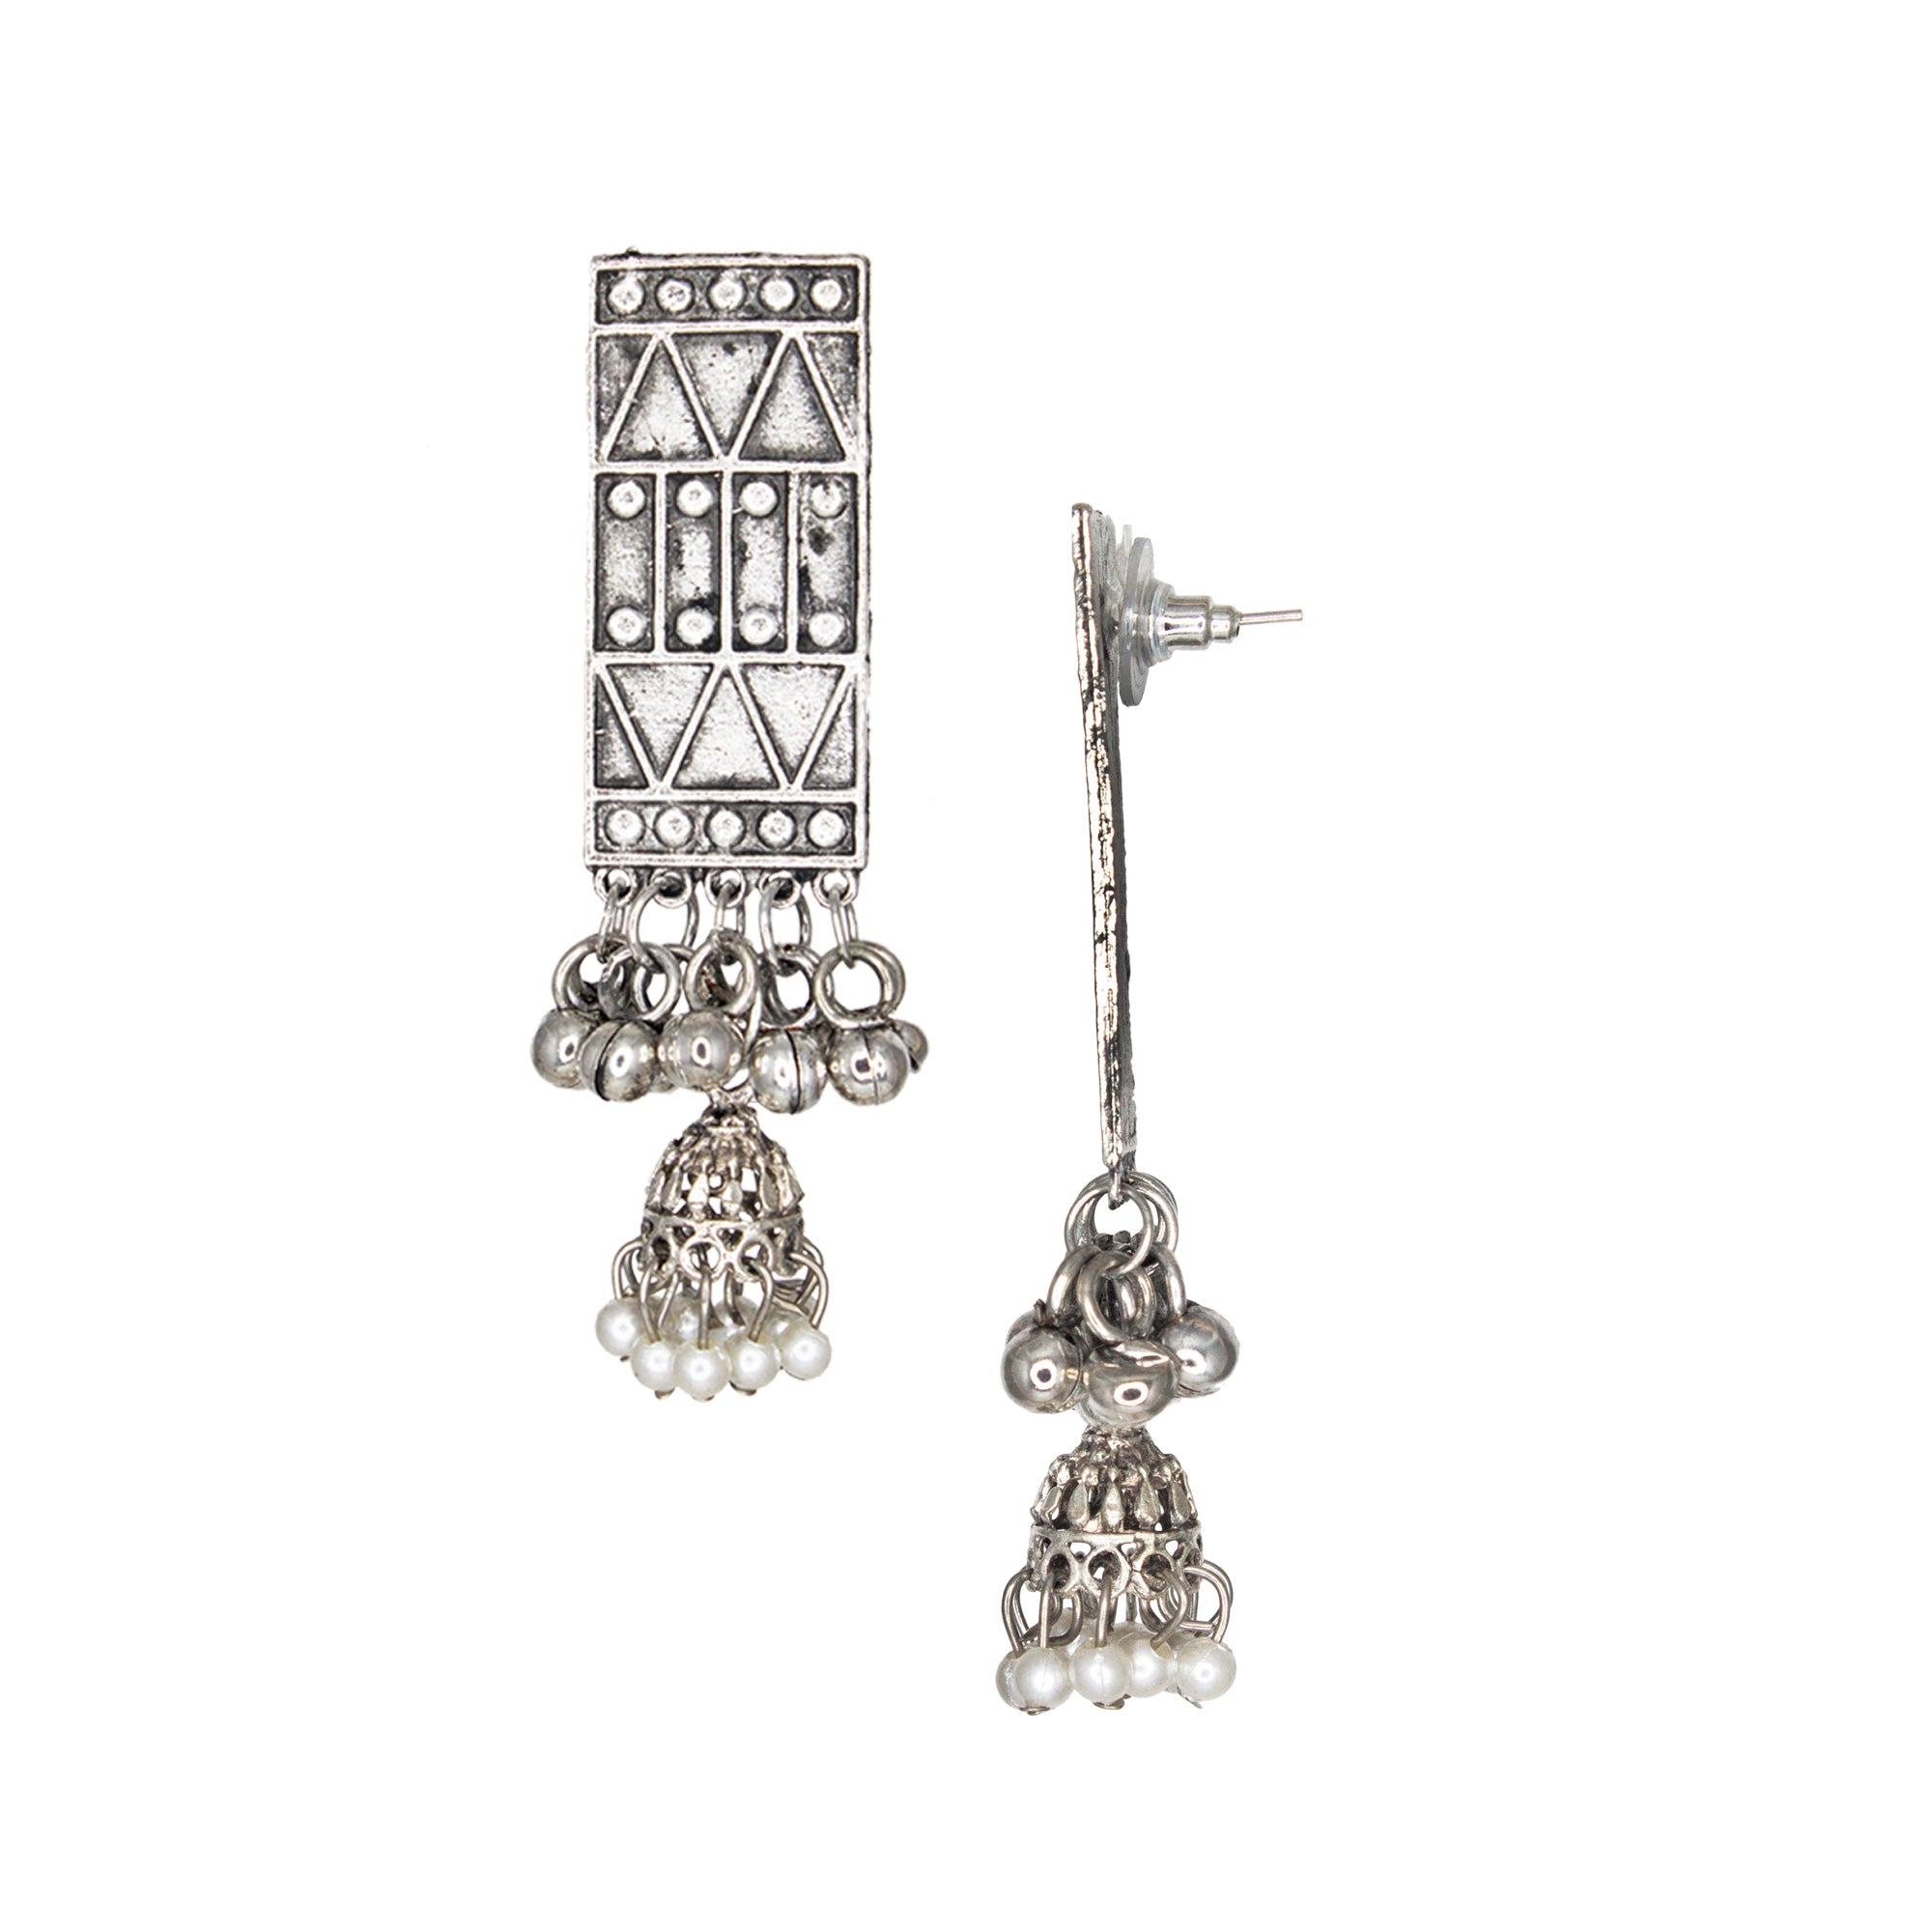 Abhinn Silver Oxidised Temple Design With Hanging Silver Beads Pendant Set For Women